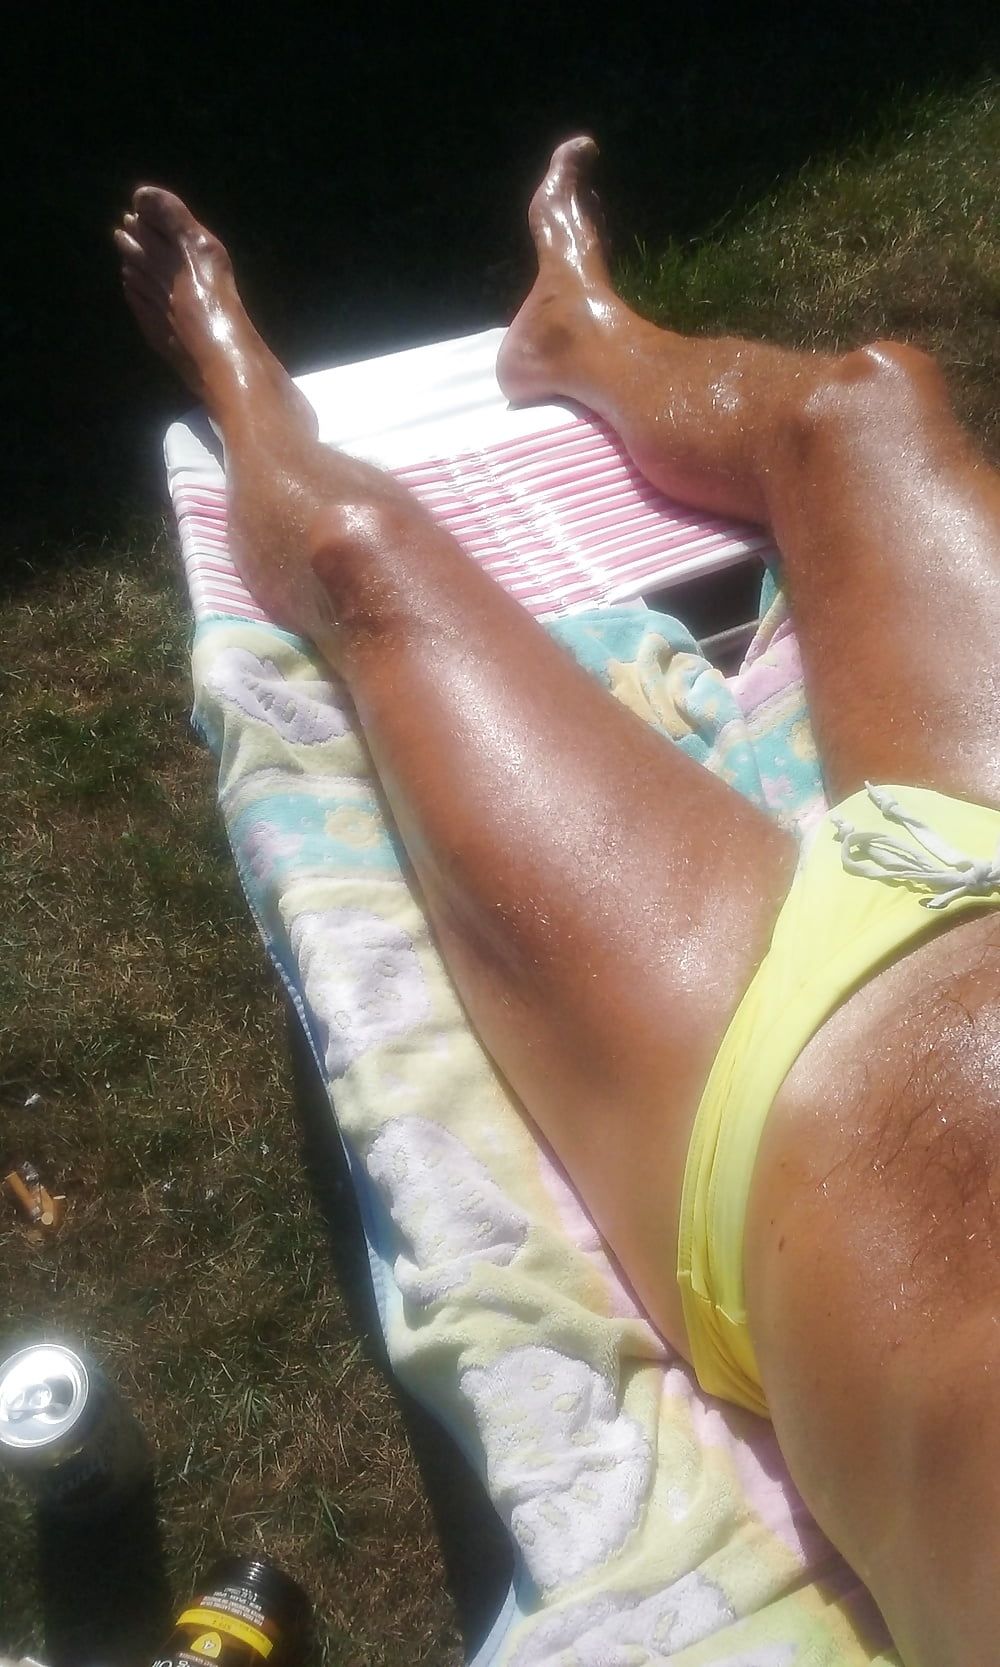 After tanning today #6